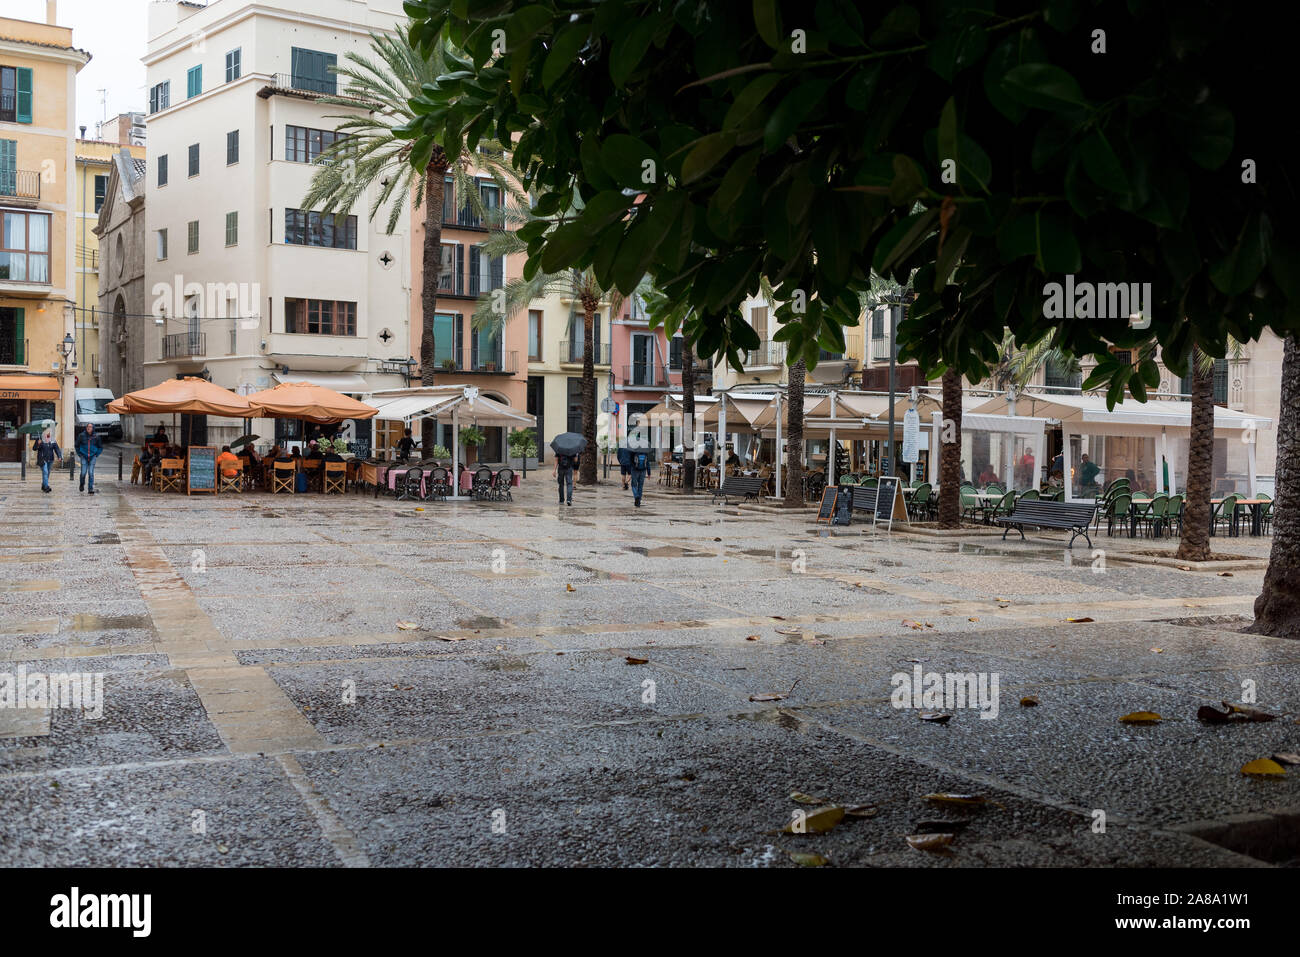 street image of Palma in the wet with people walking with umbrellas Stock Photo